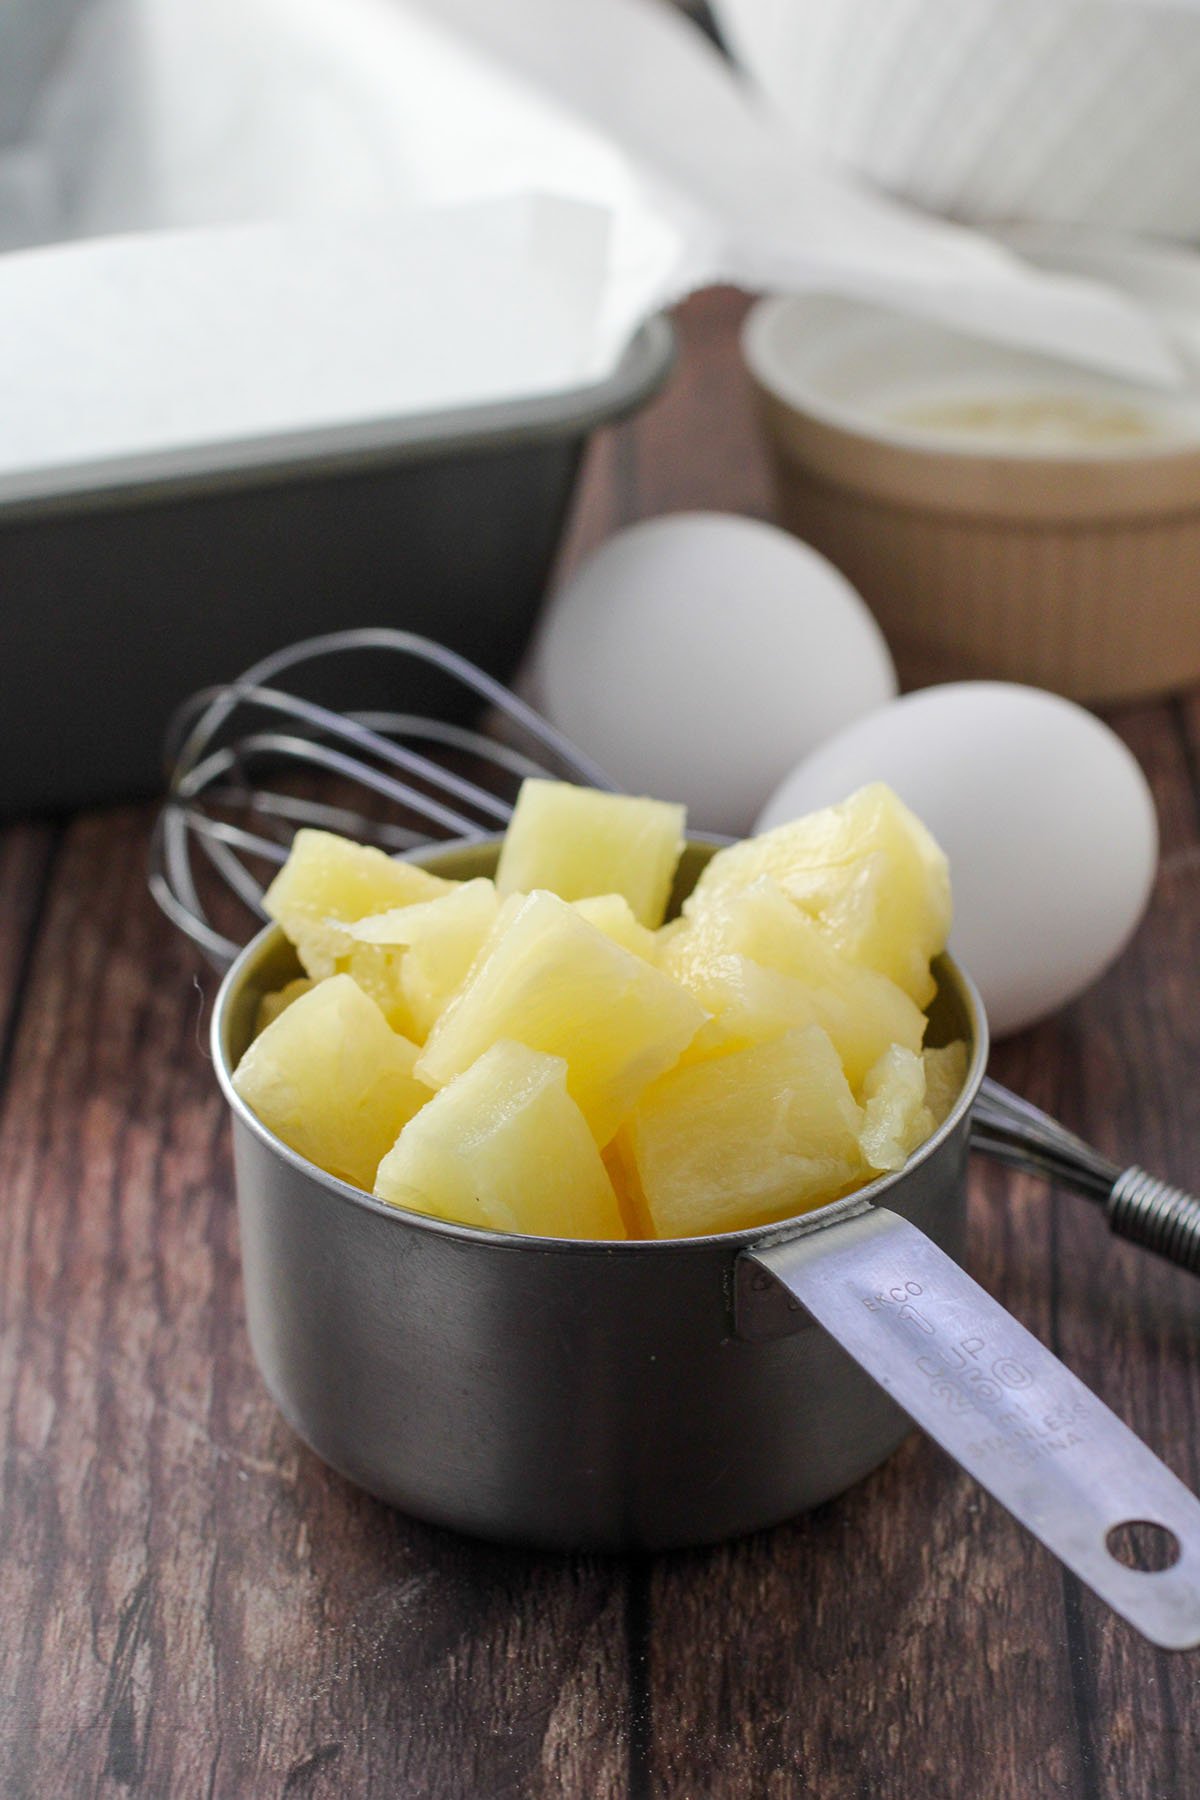 Pineapples and eggs, the ingredients for the Pineapple Loaf Cake.